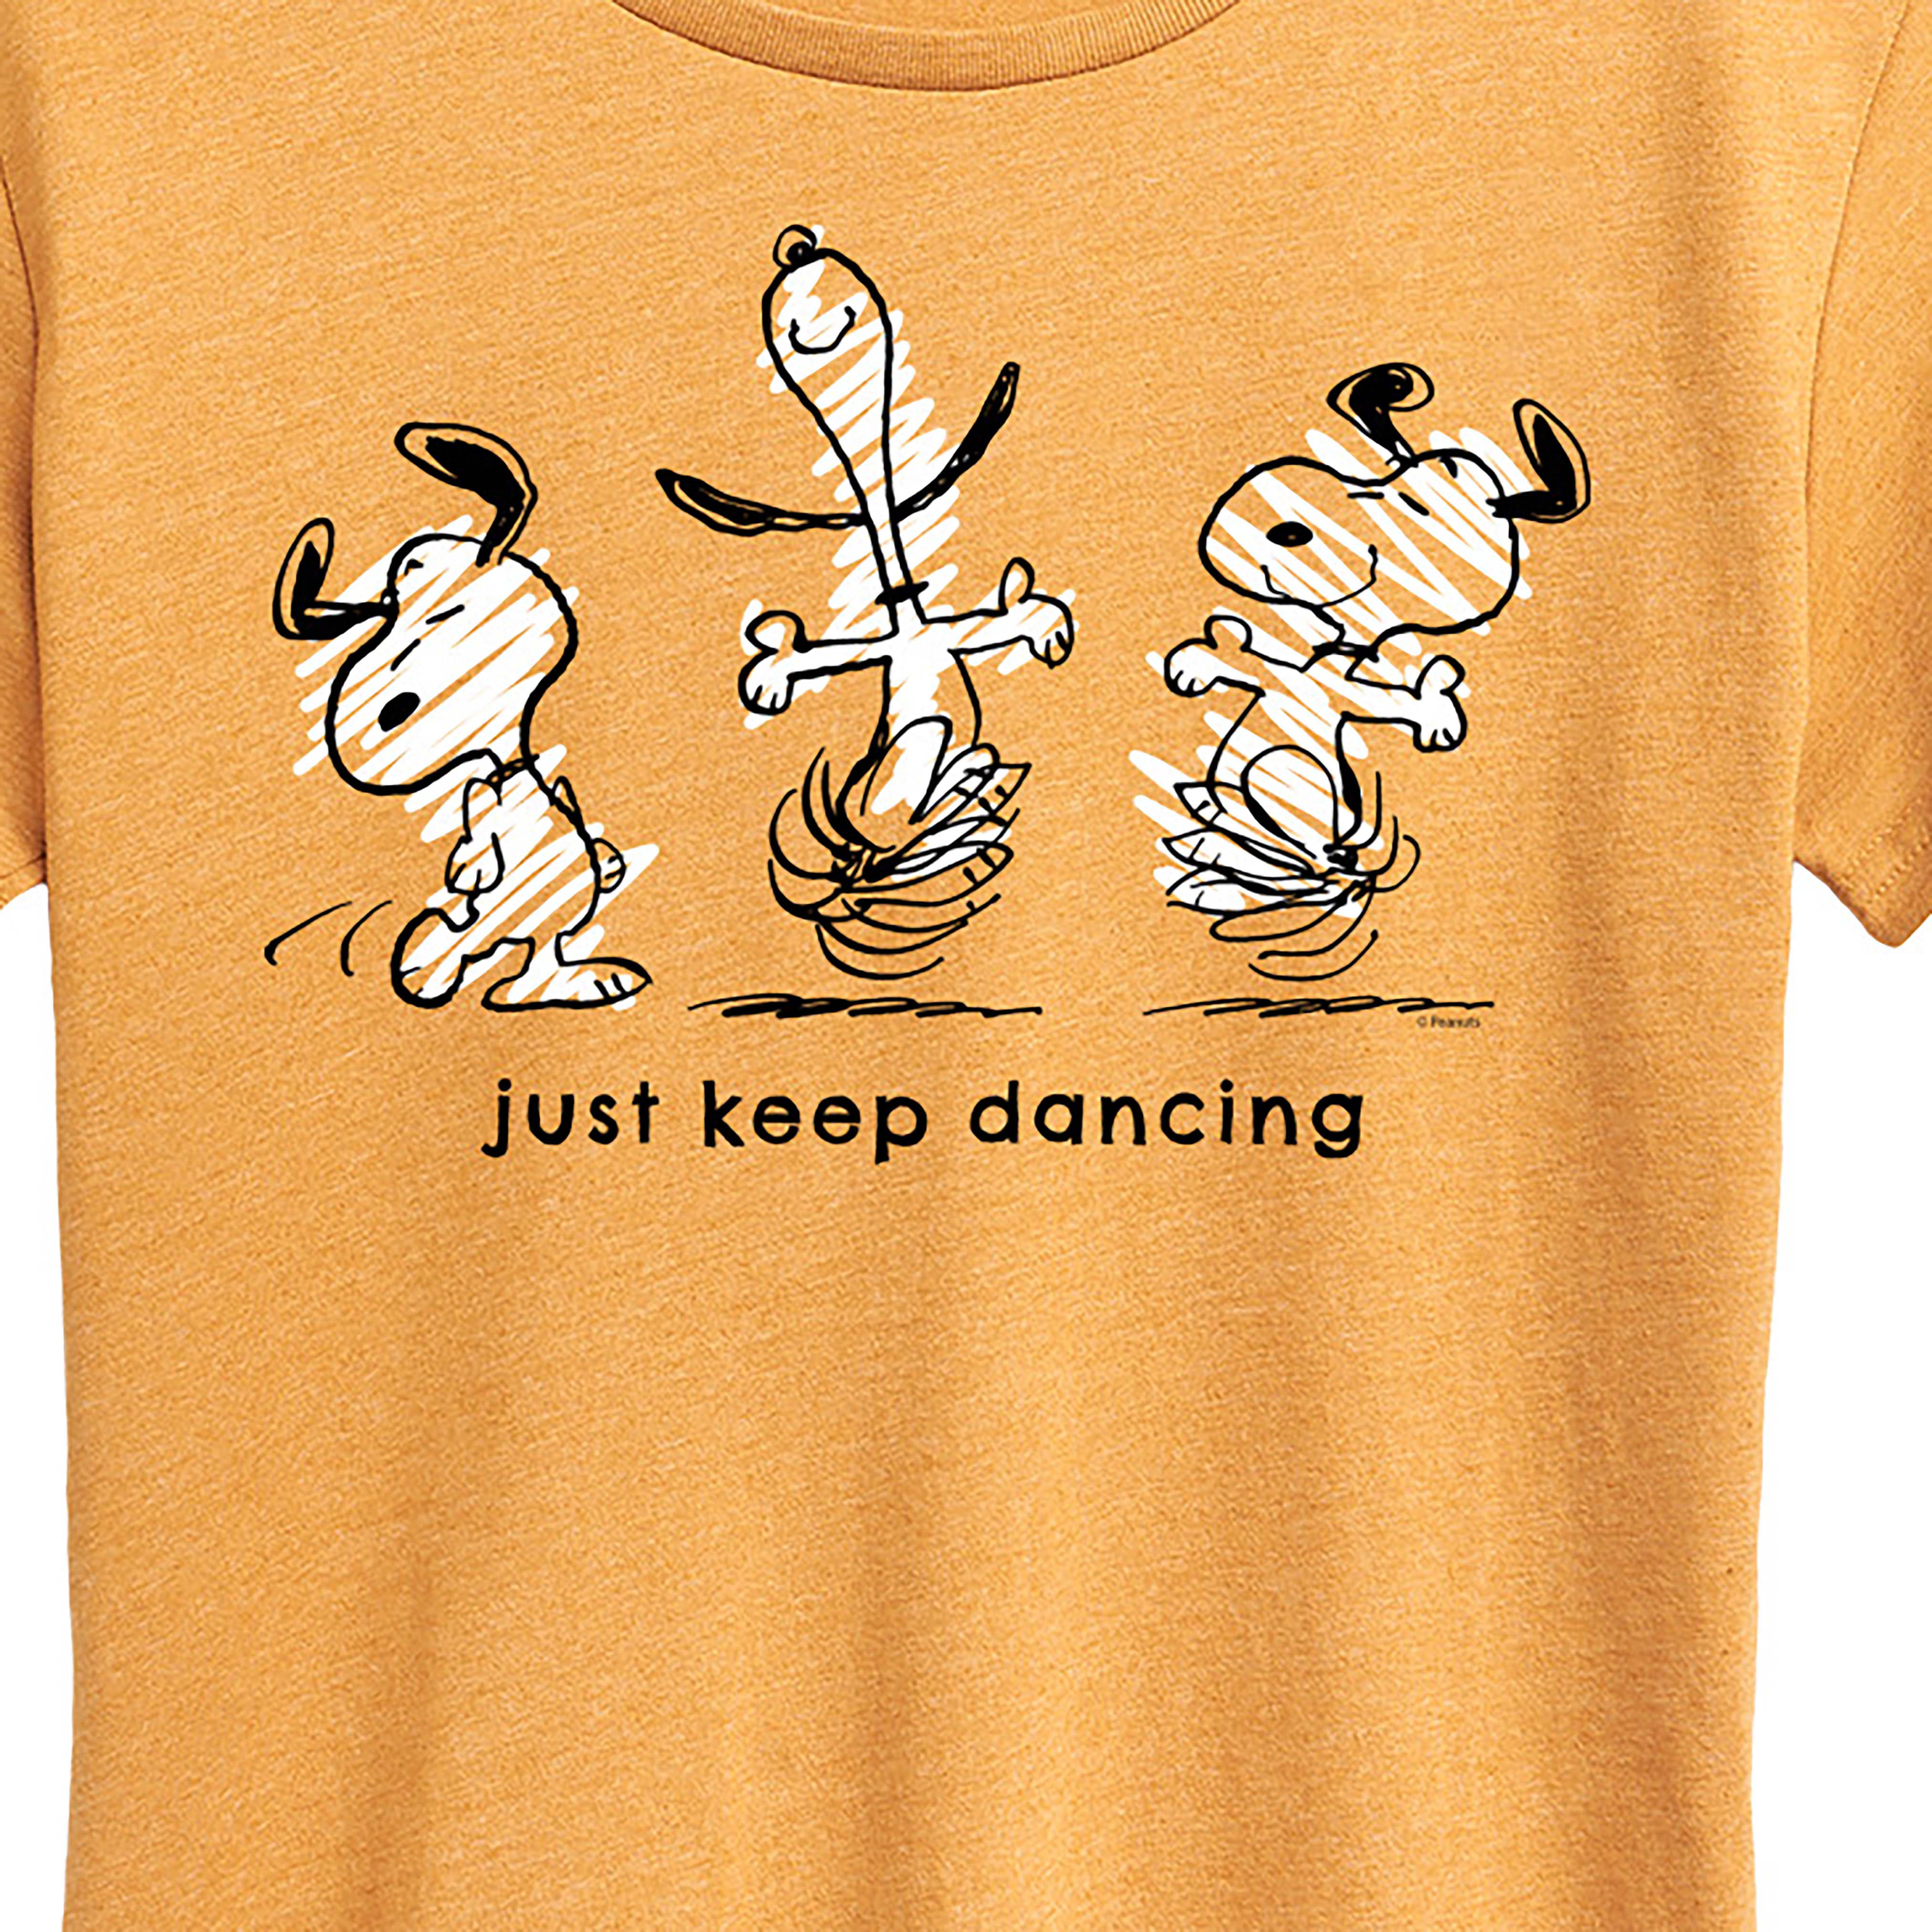 Peanuts - Snoopy - Dancing Sleeve Graphic Just T-Shirt Short Women\'s Keep